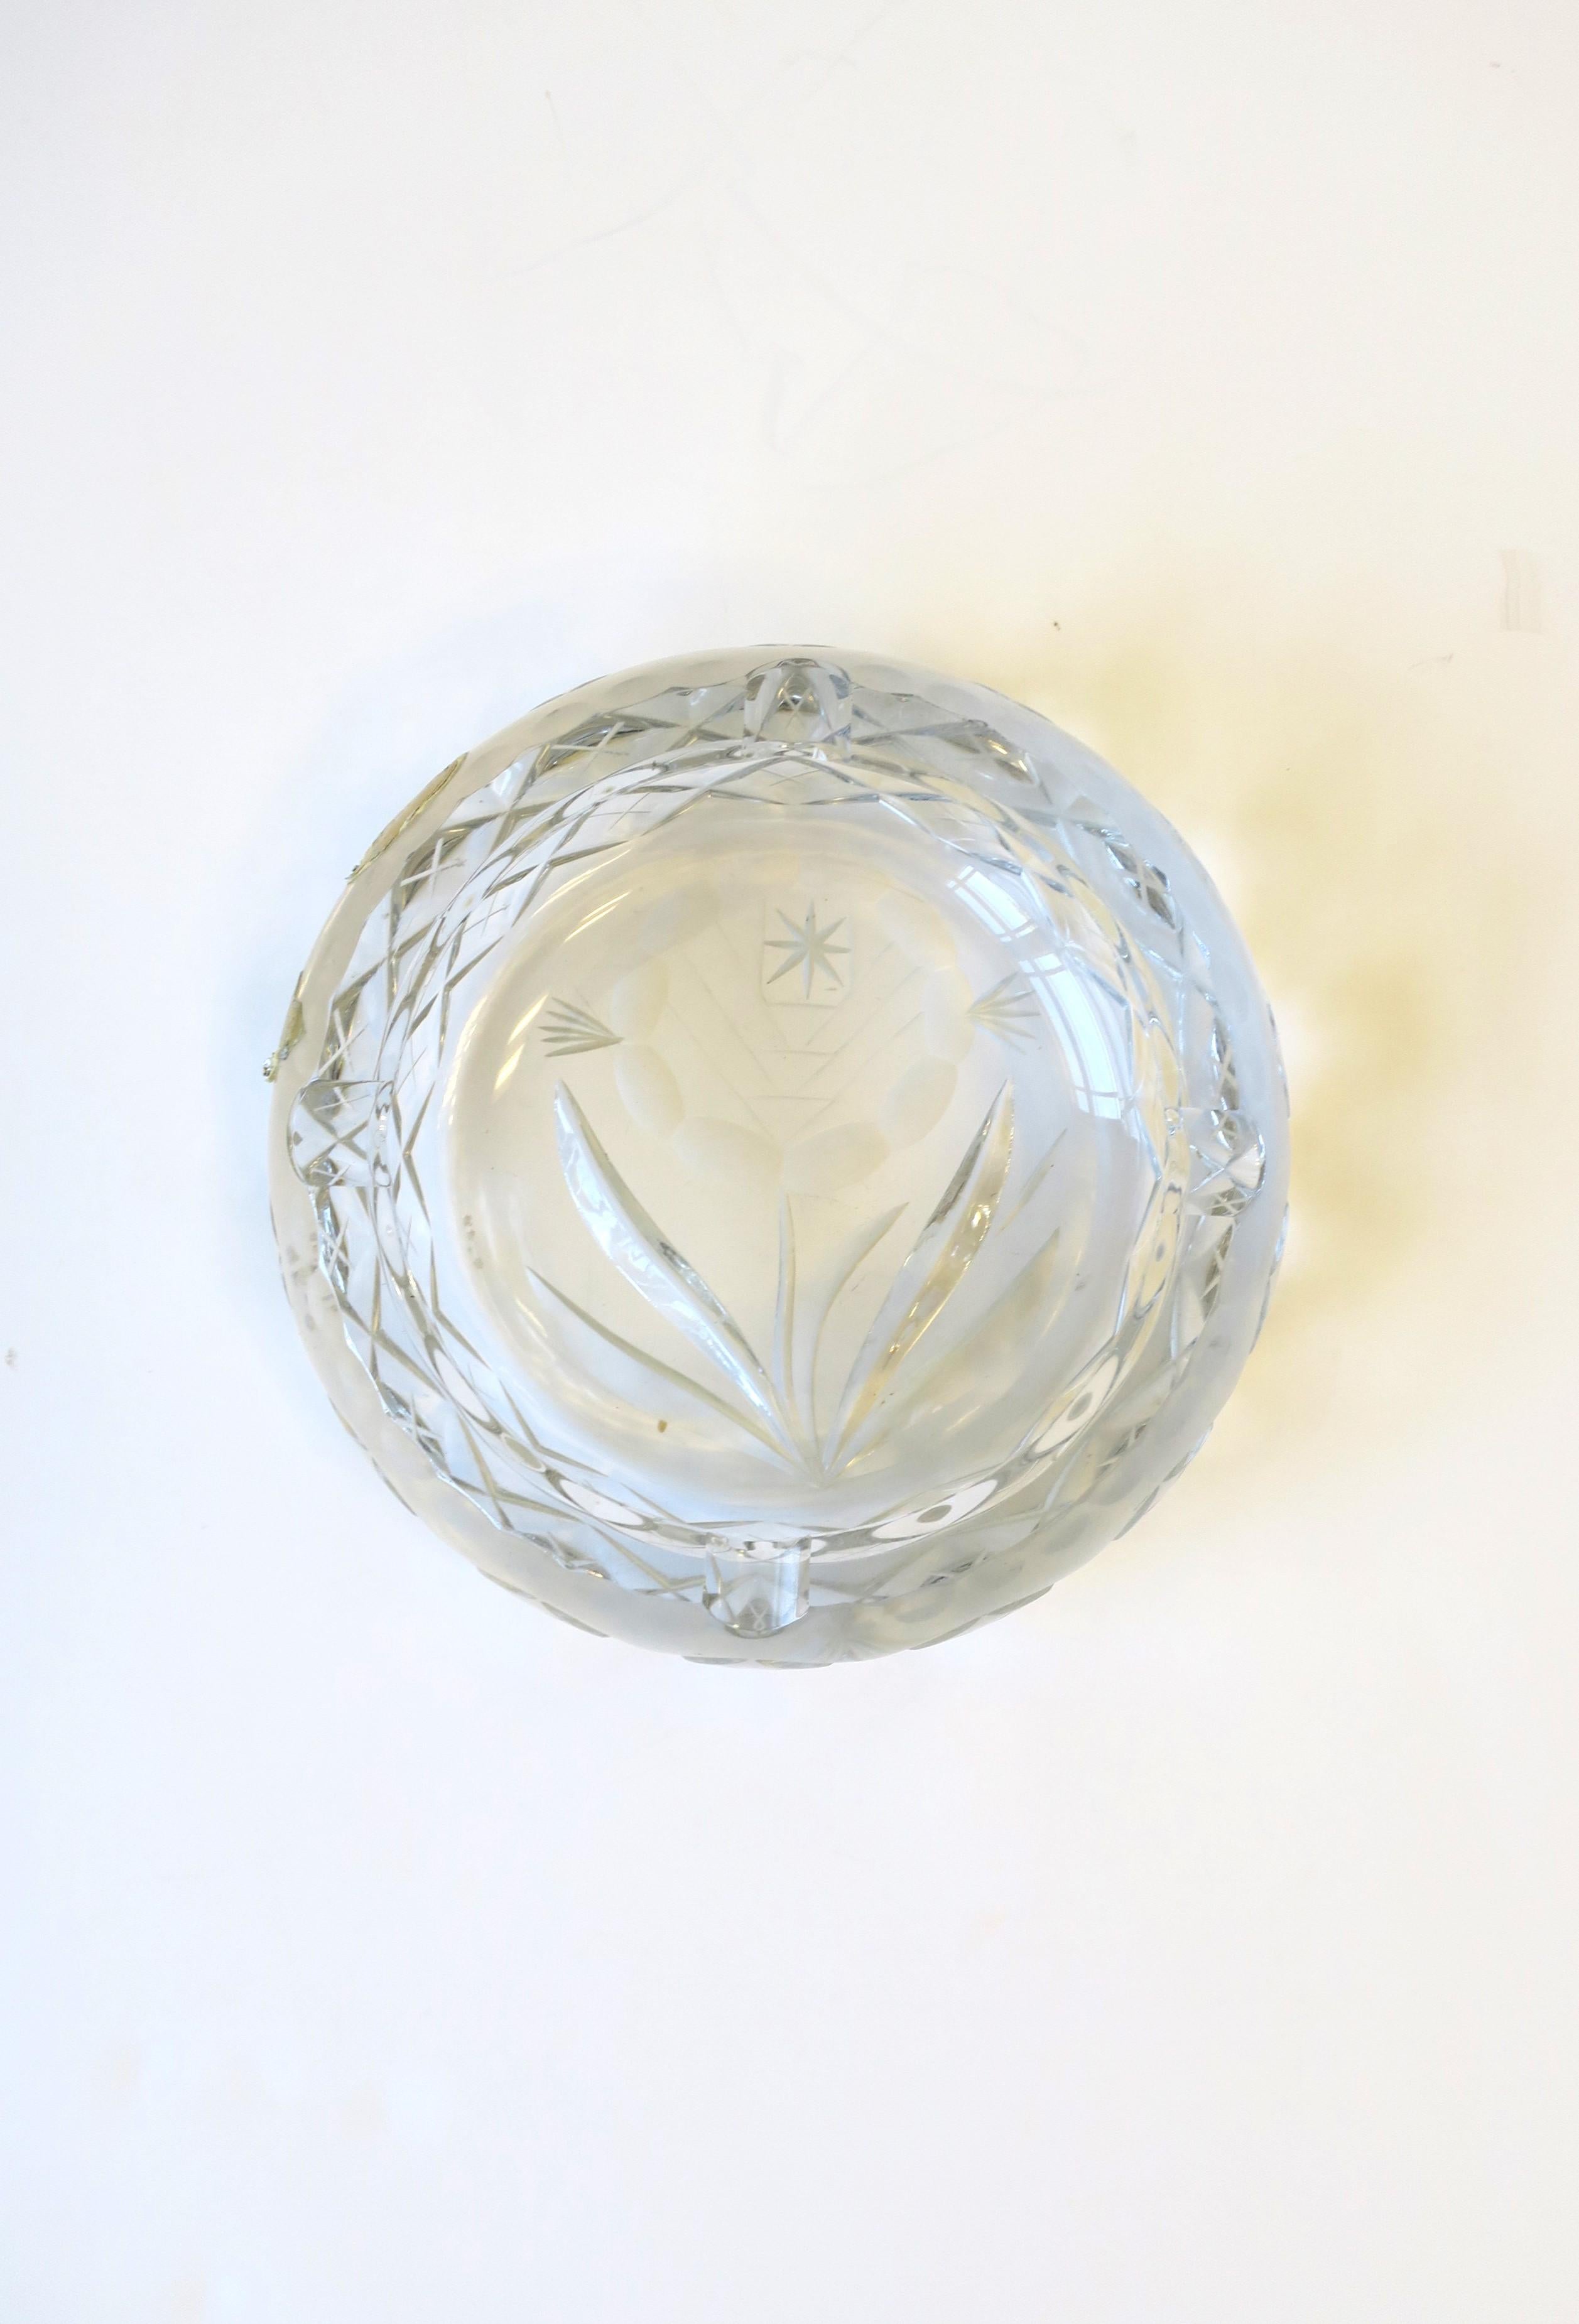 20th Century Bohemian Cut Crystal Bowl or Ashtray, Mid-20th, Czech For Sale